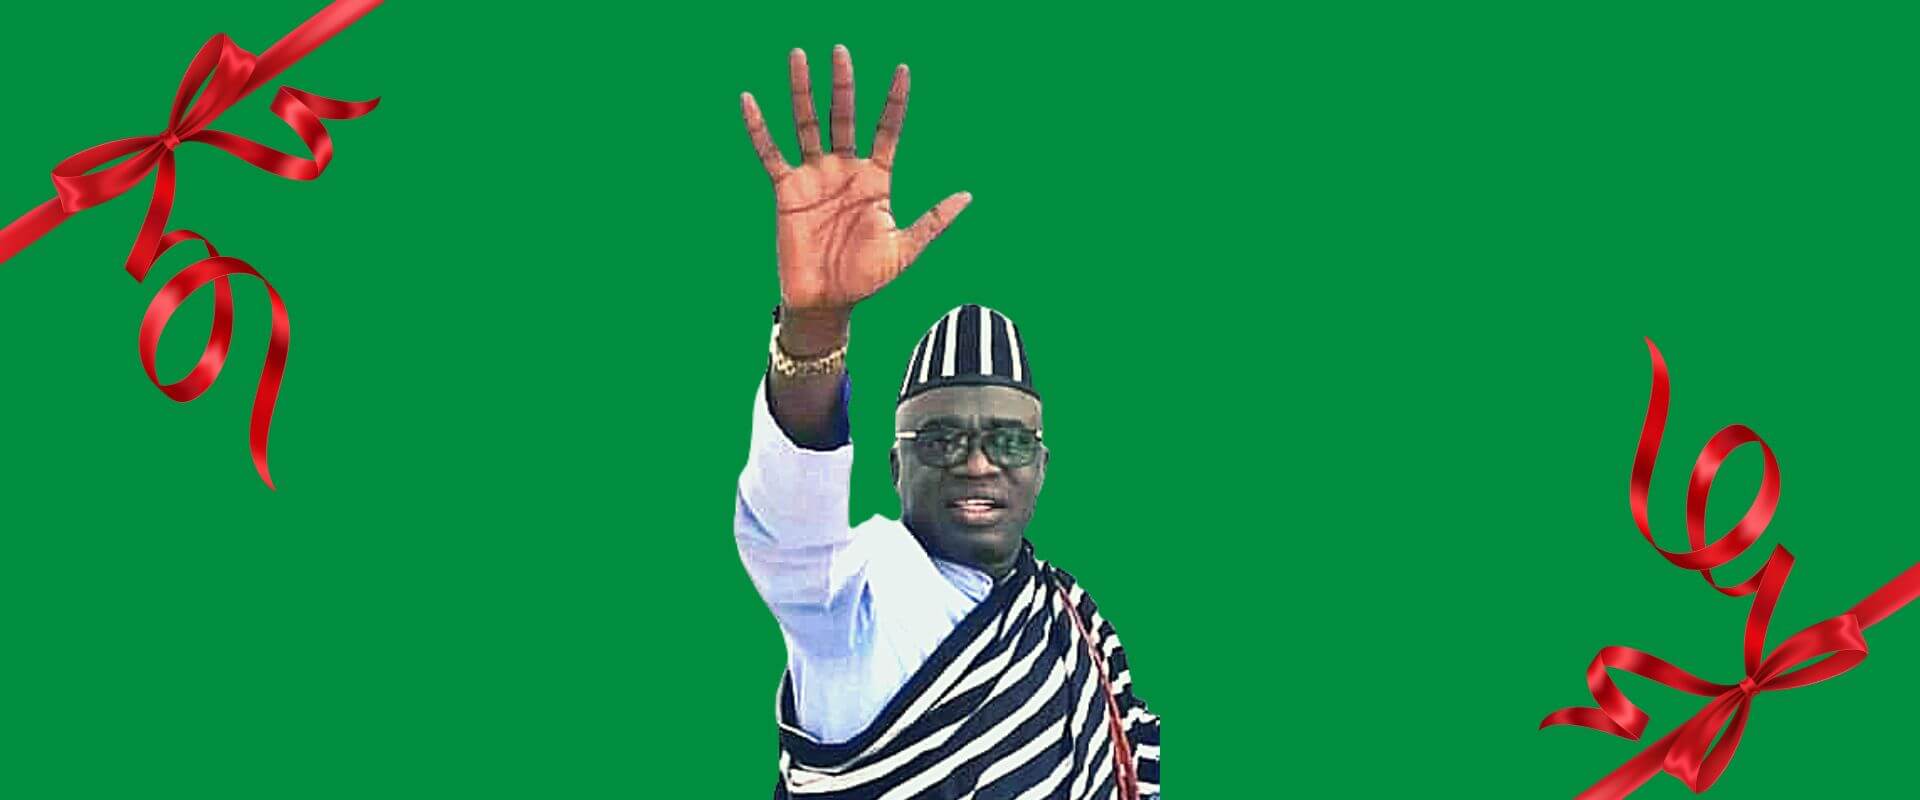 Benue Governorship - Fr. Alia, Fit for the Job